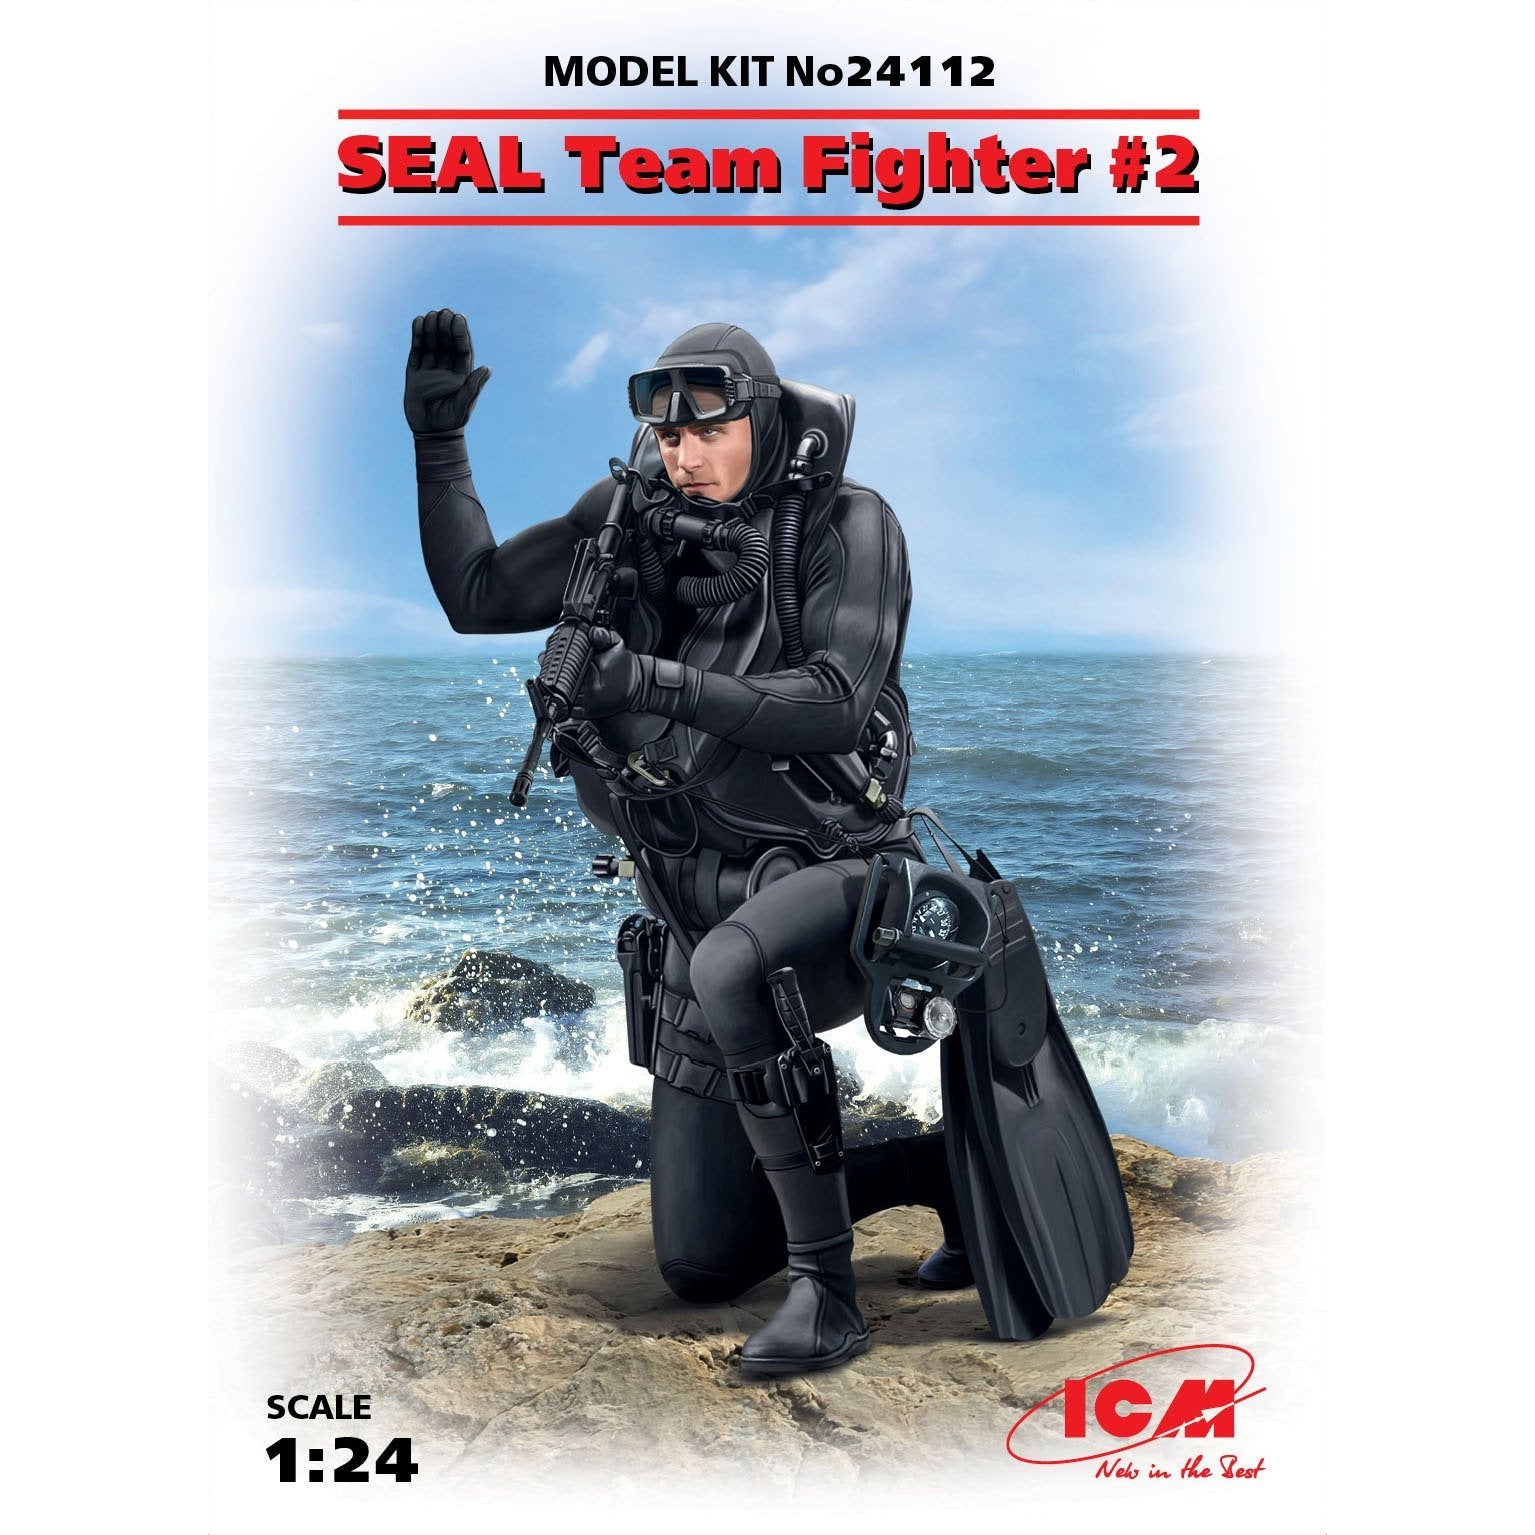 SEAL Team Fighter #2 1/24 by ICM